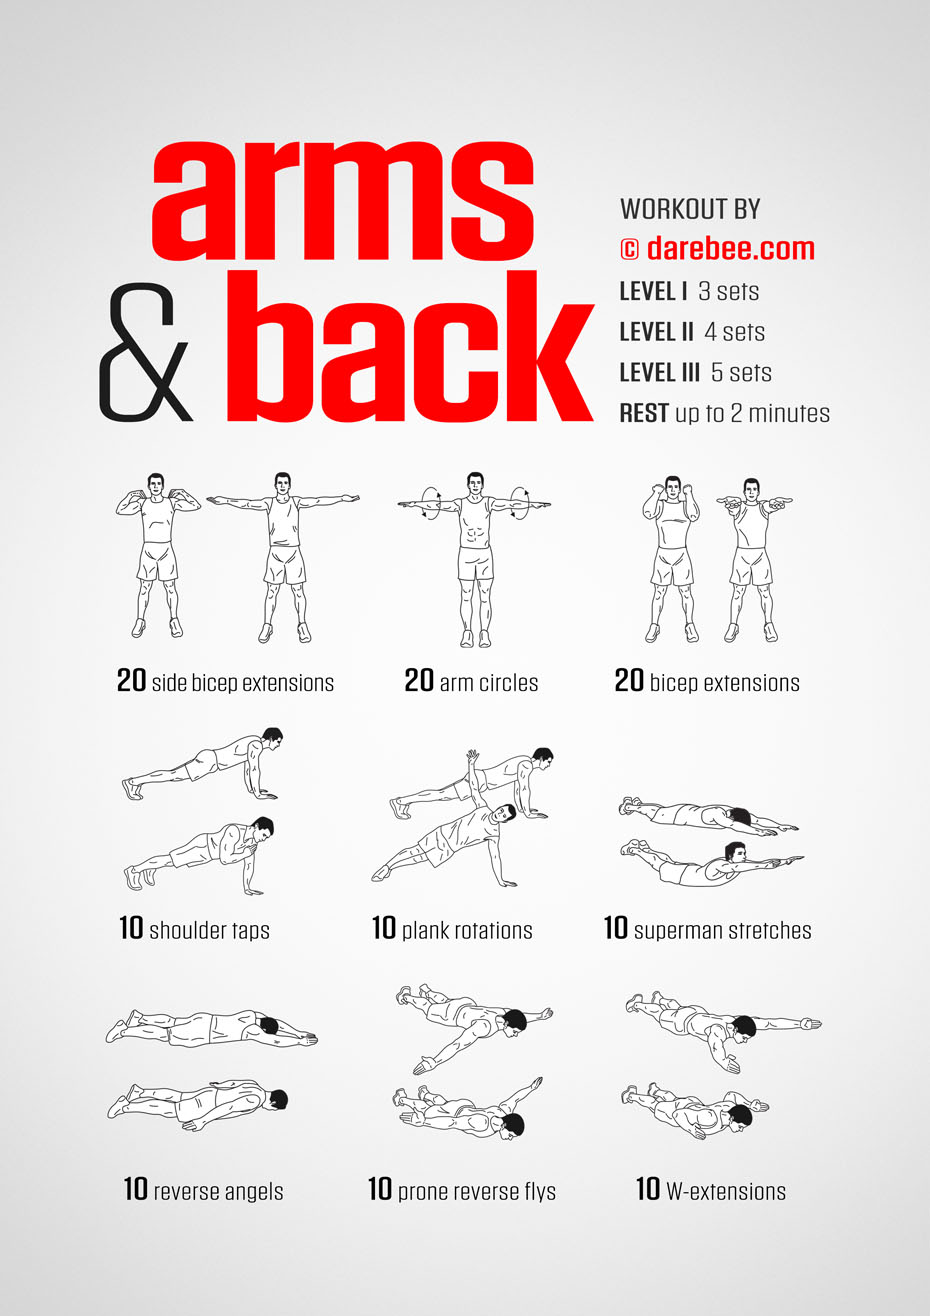 Arms & Back Workout